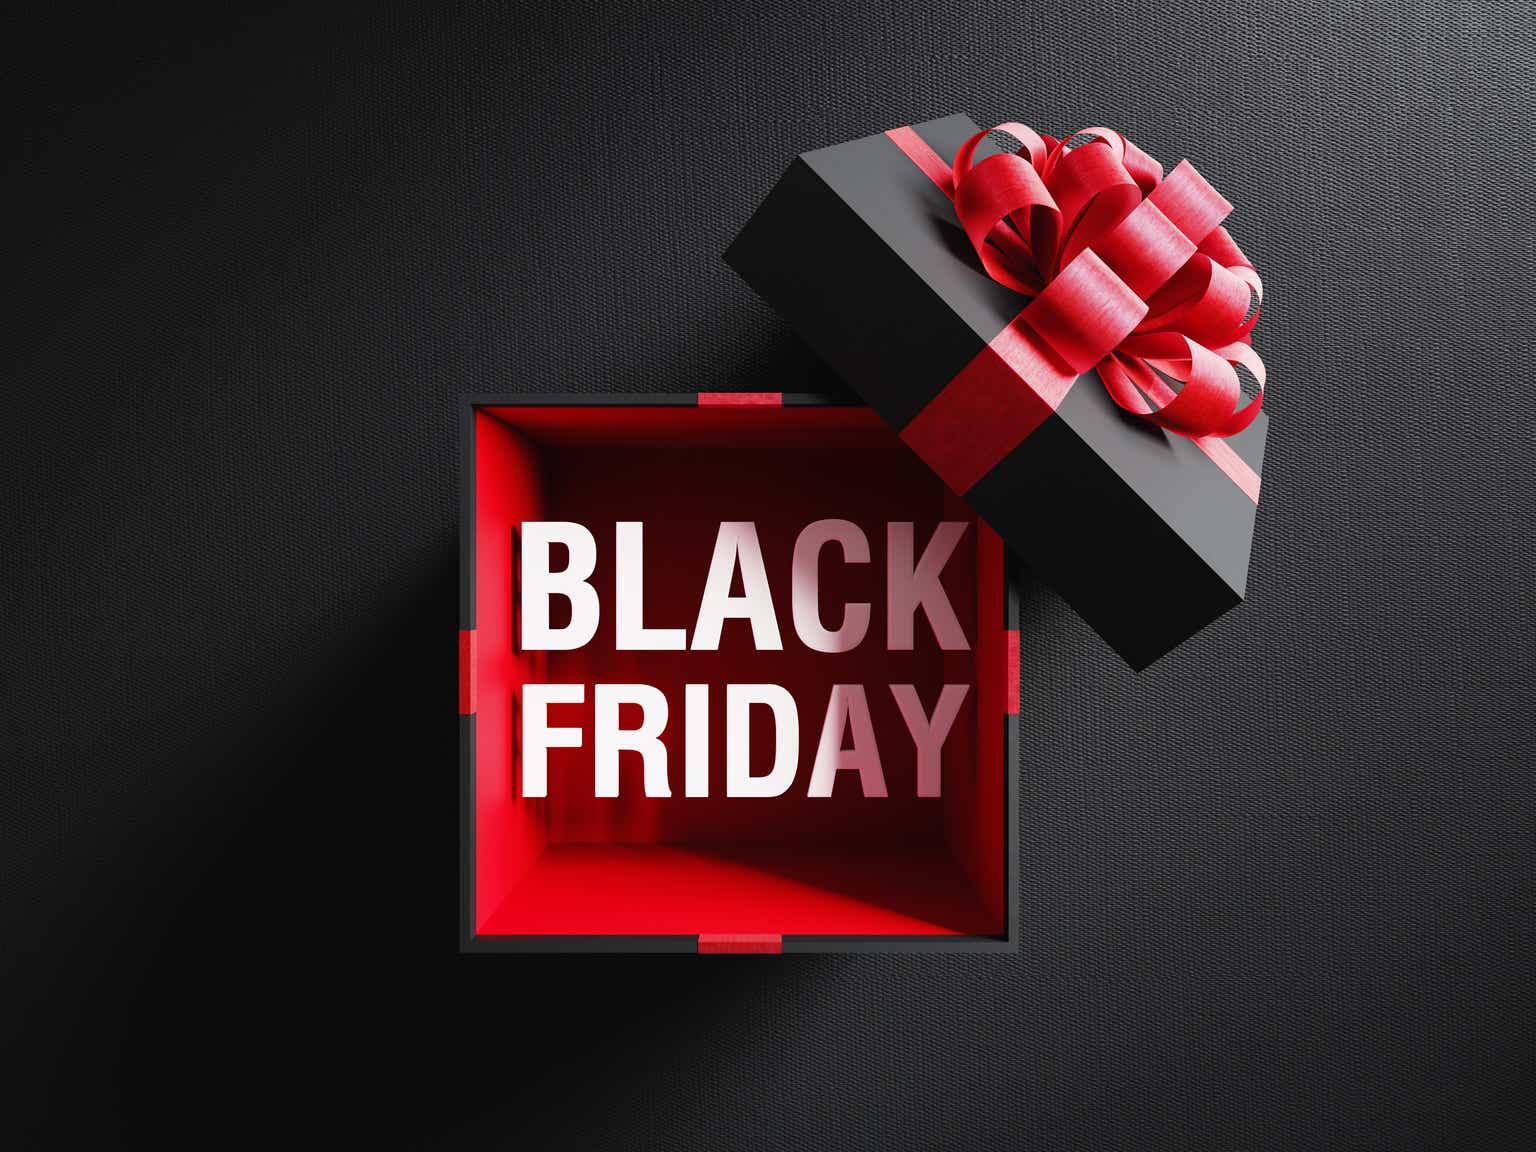 Black Friday Sales: All You Need to Know – India TV